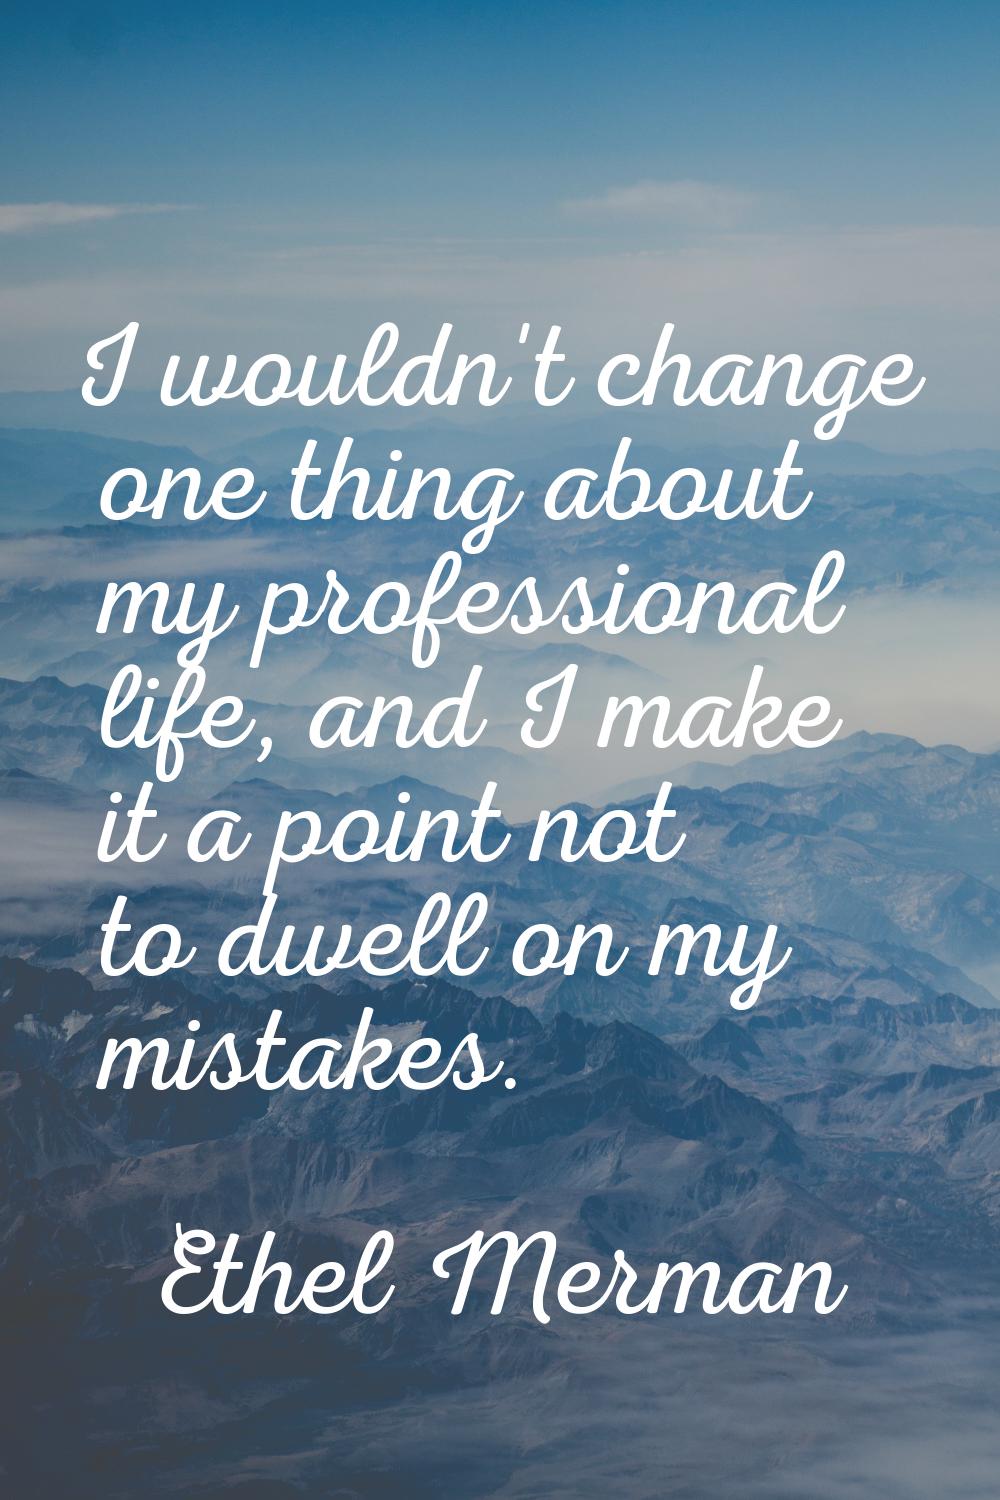 I wouldn't change one thing about my professional life, and I make it a point not to dwell on my mi